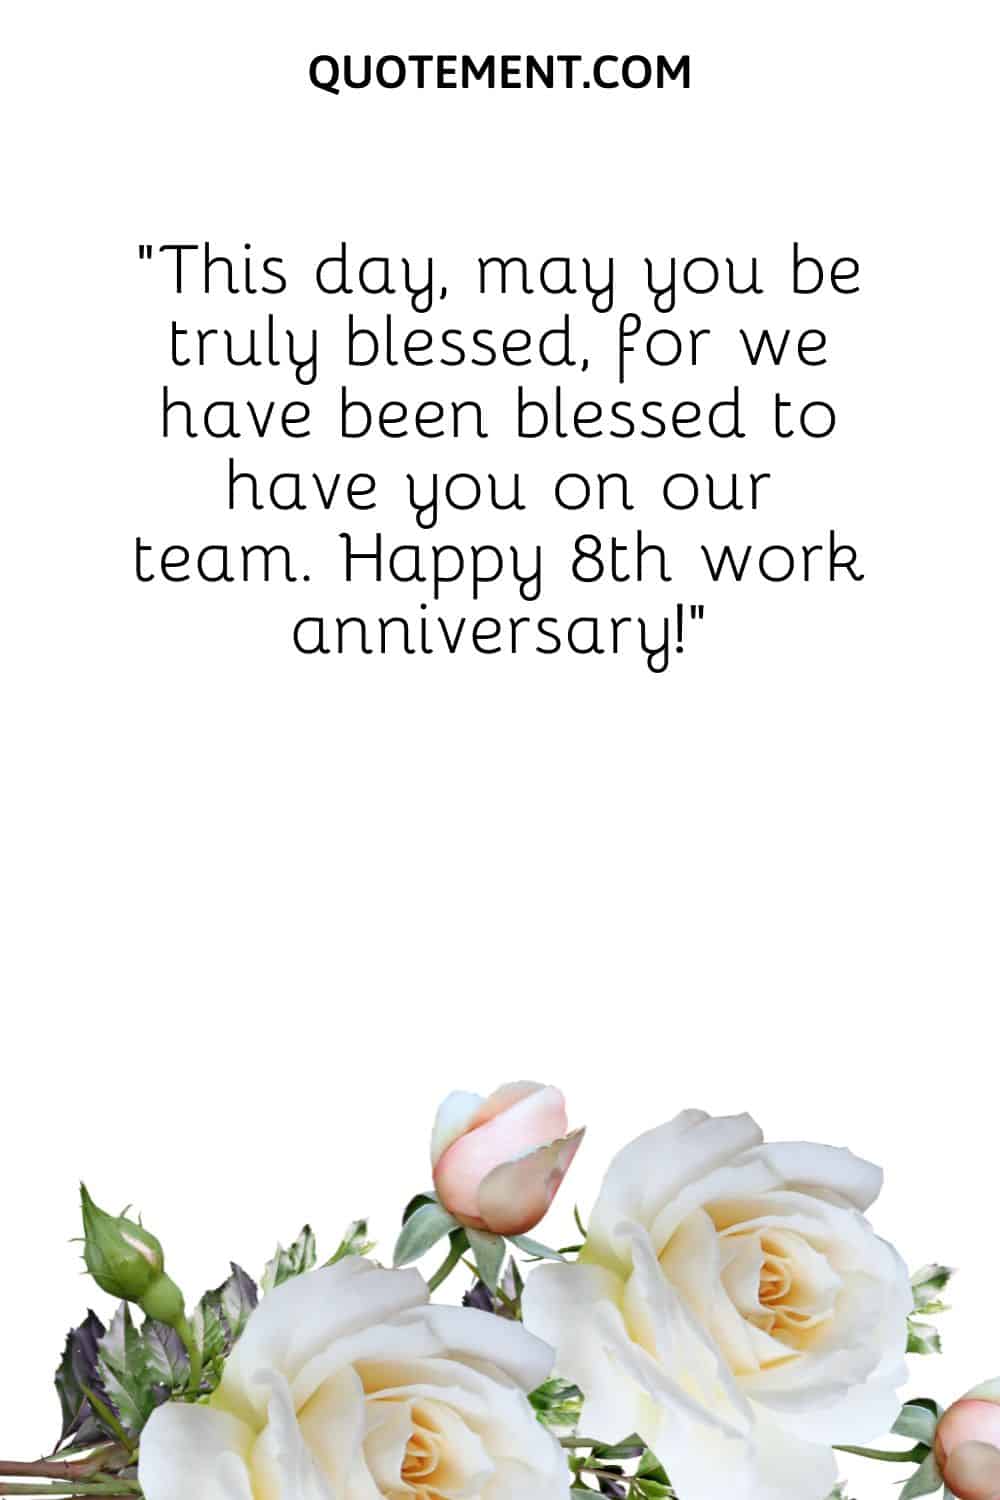 “This day, may you be truly blessed, for we have been blessed to have you on our team. Happy 8th work anniversary!”